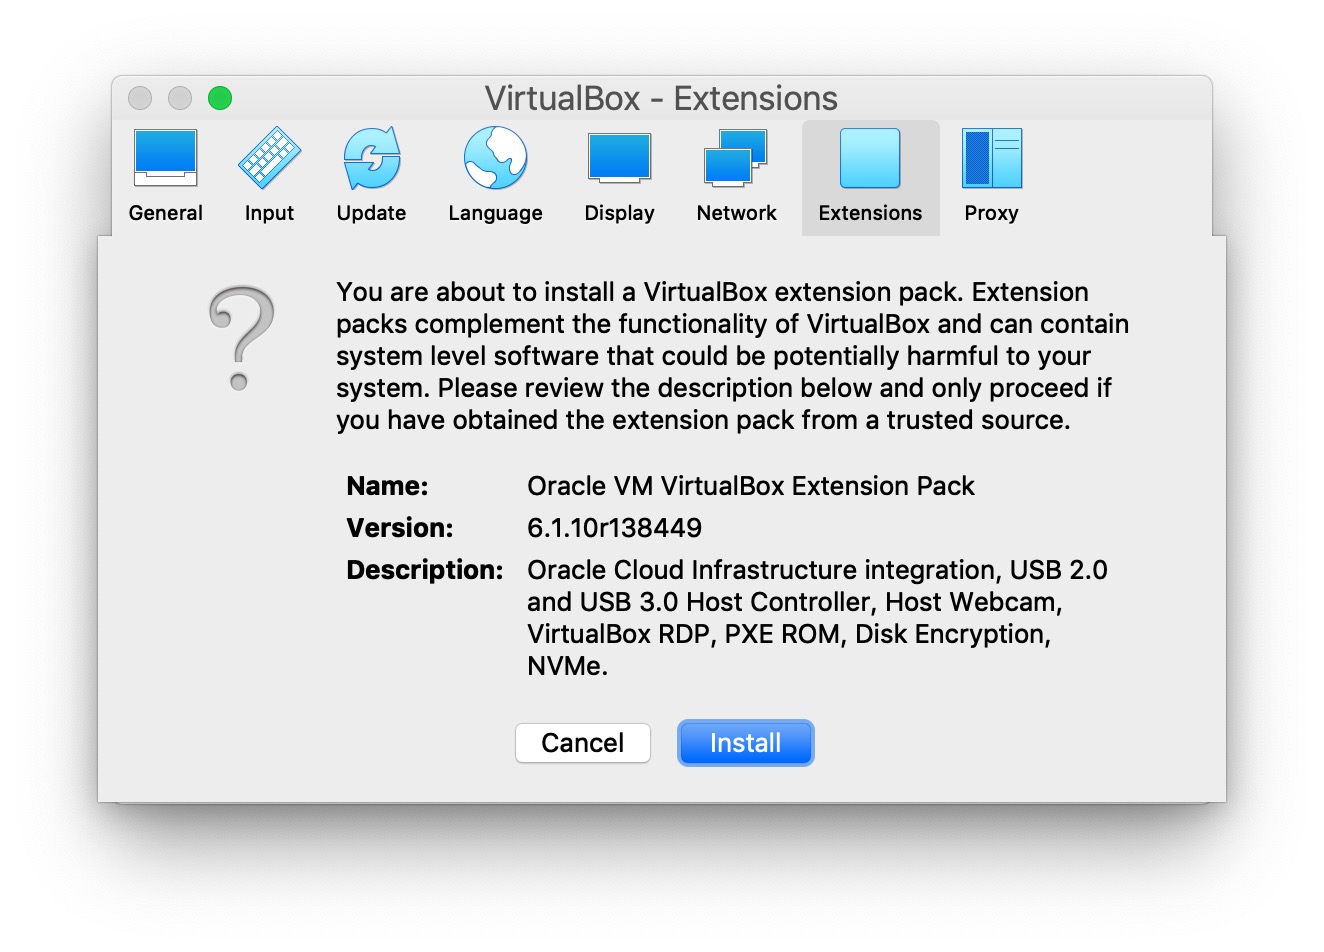 How to Install VirtualBox Extension Pack on Mac, Windows, Linux